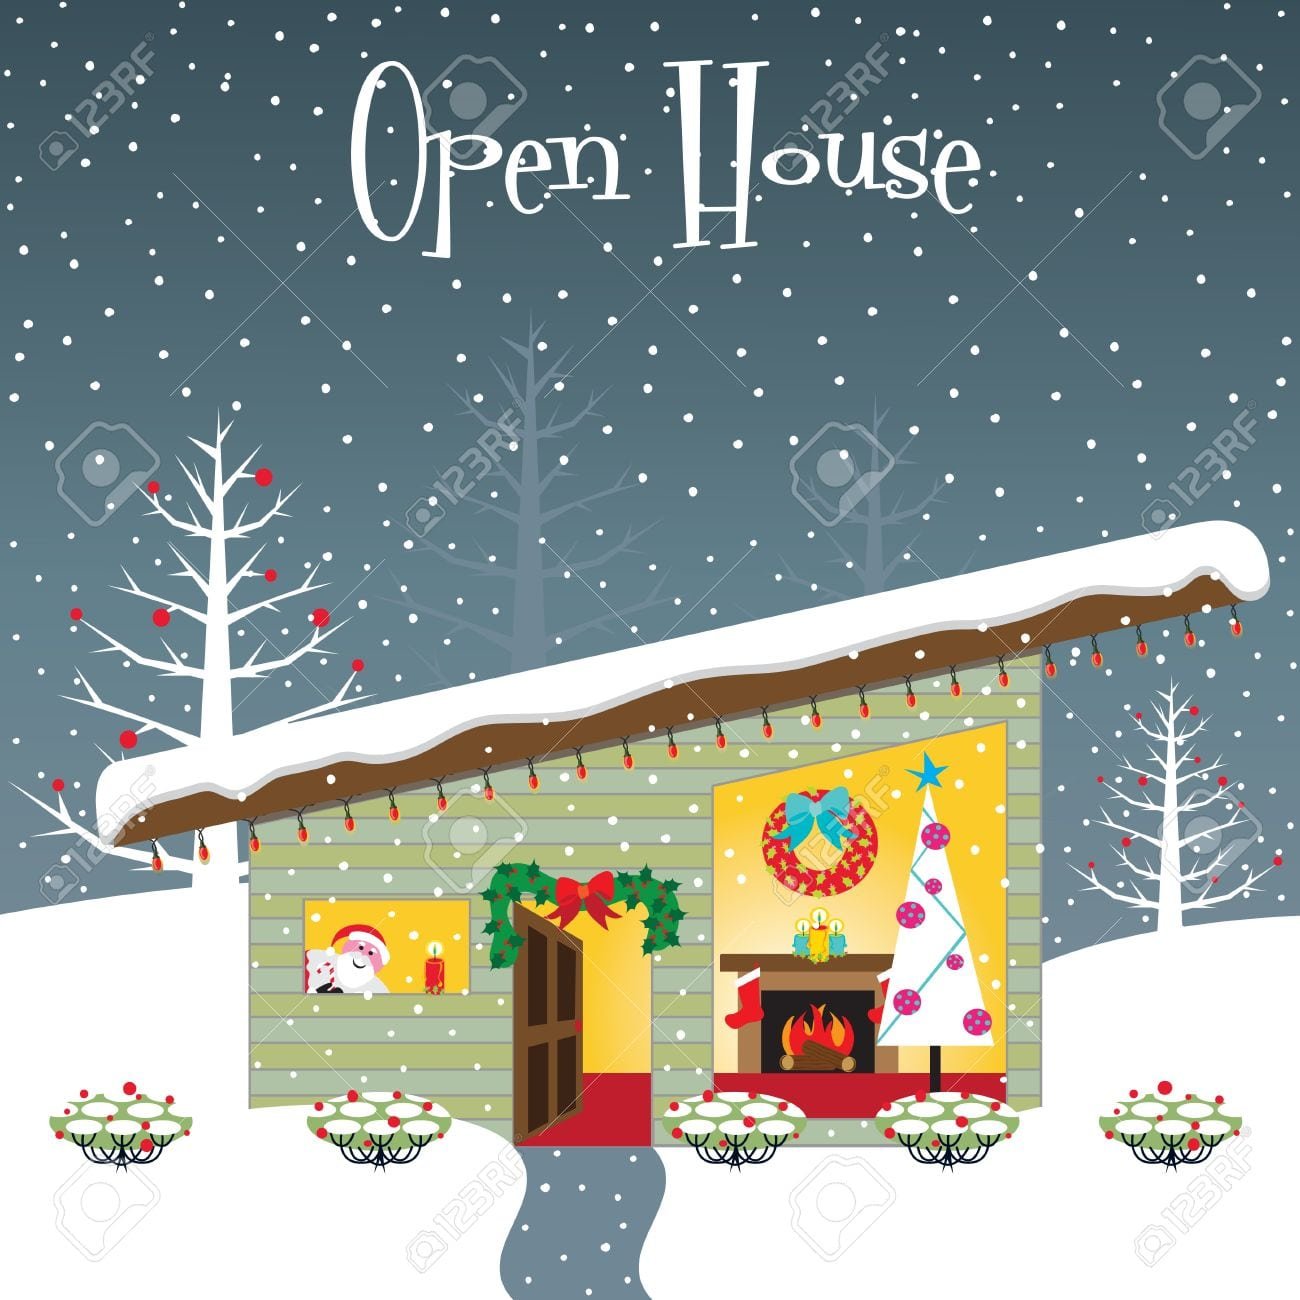 Christmas Open House Party Invitation With Room For Your Copy